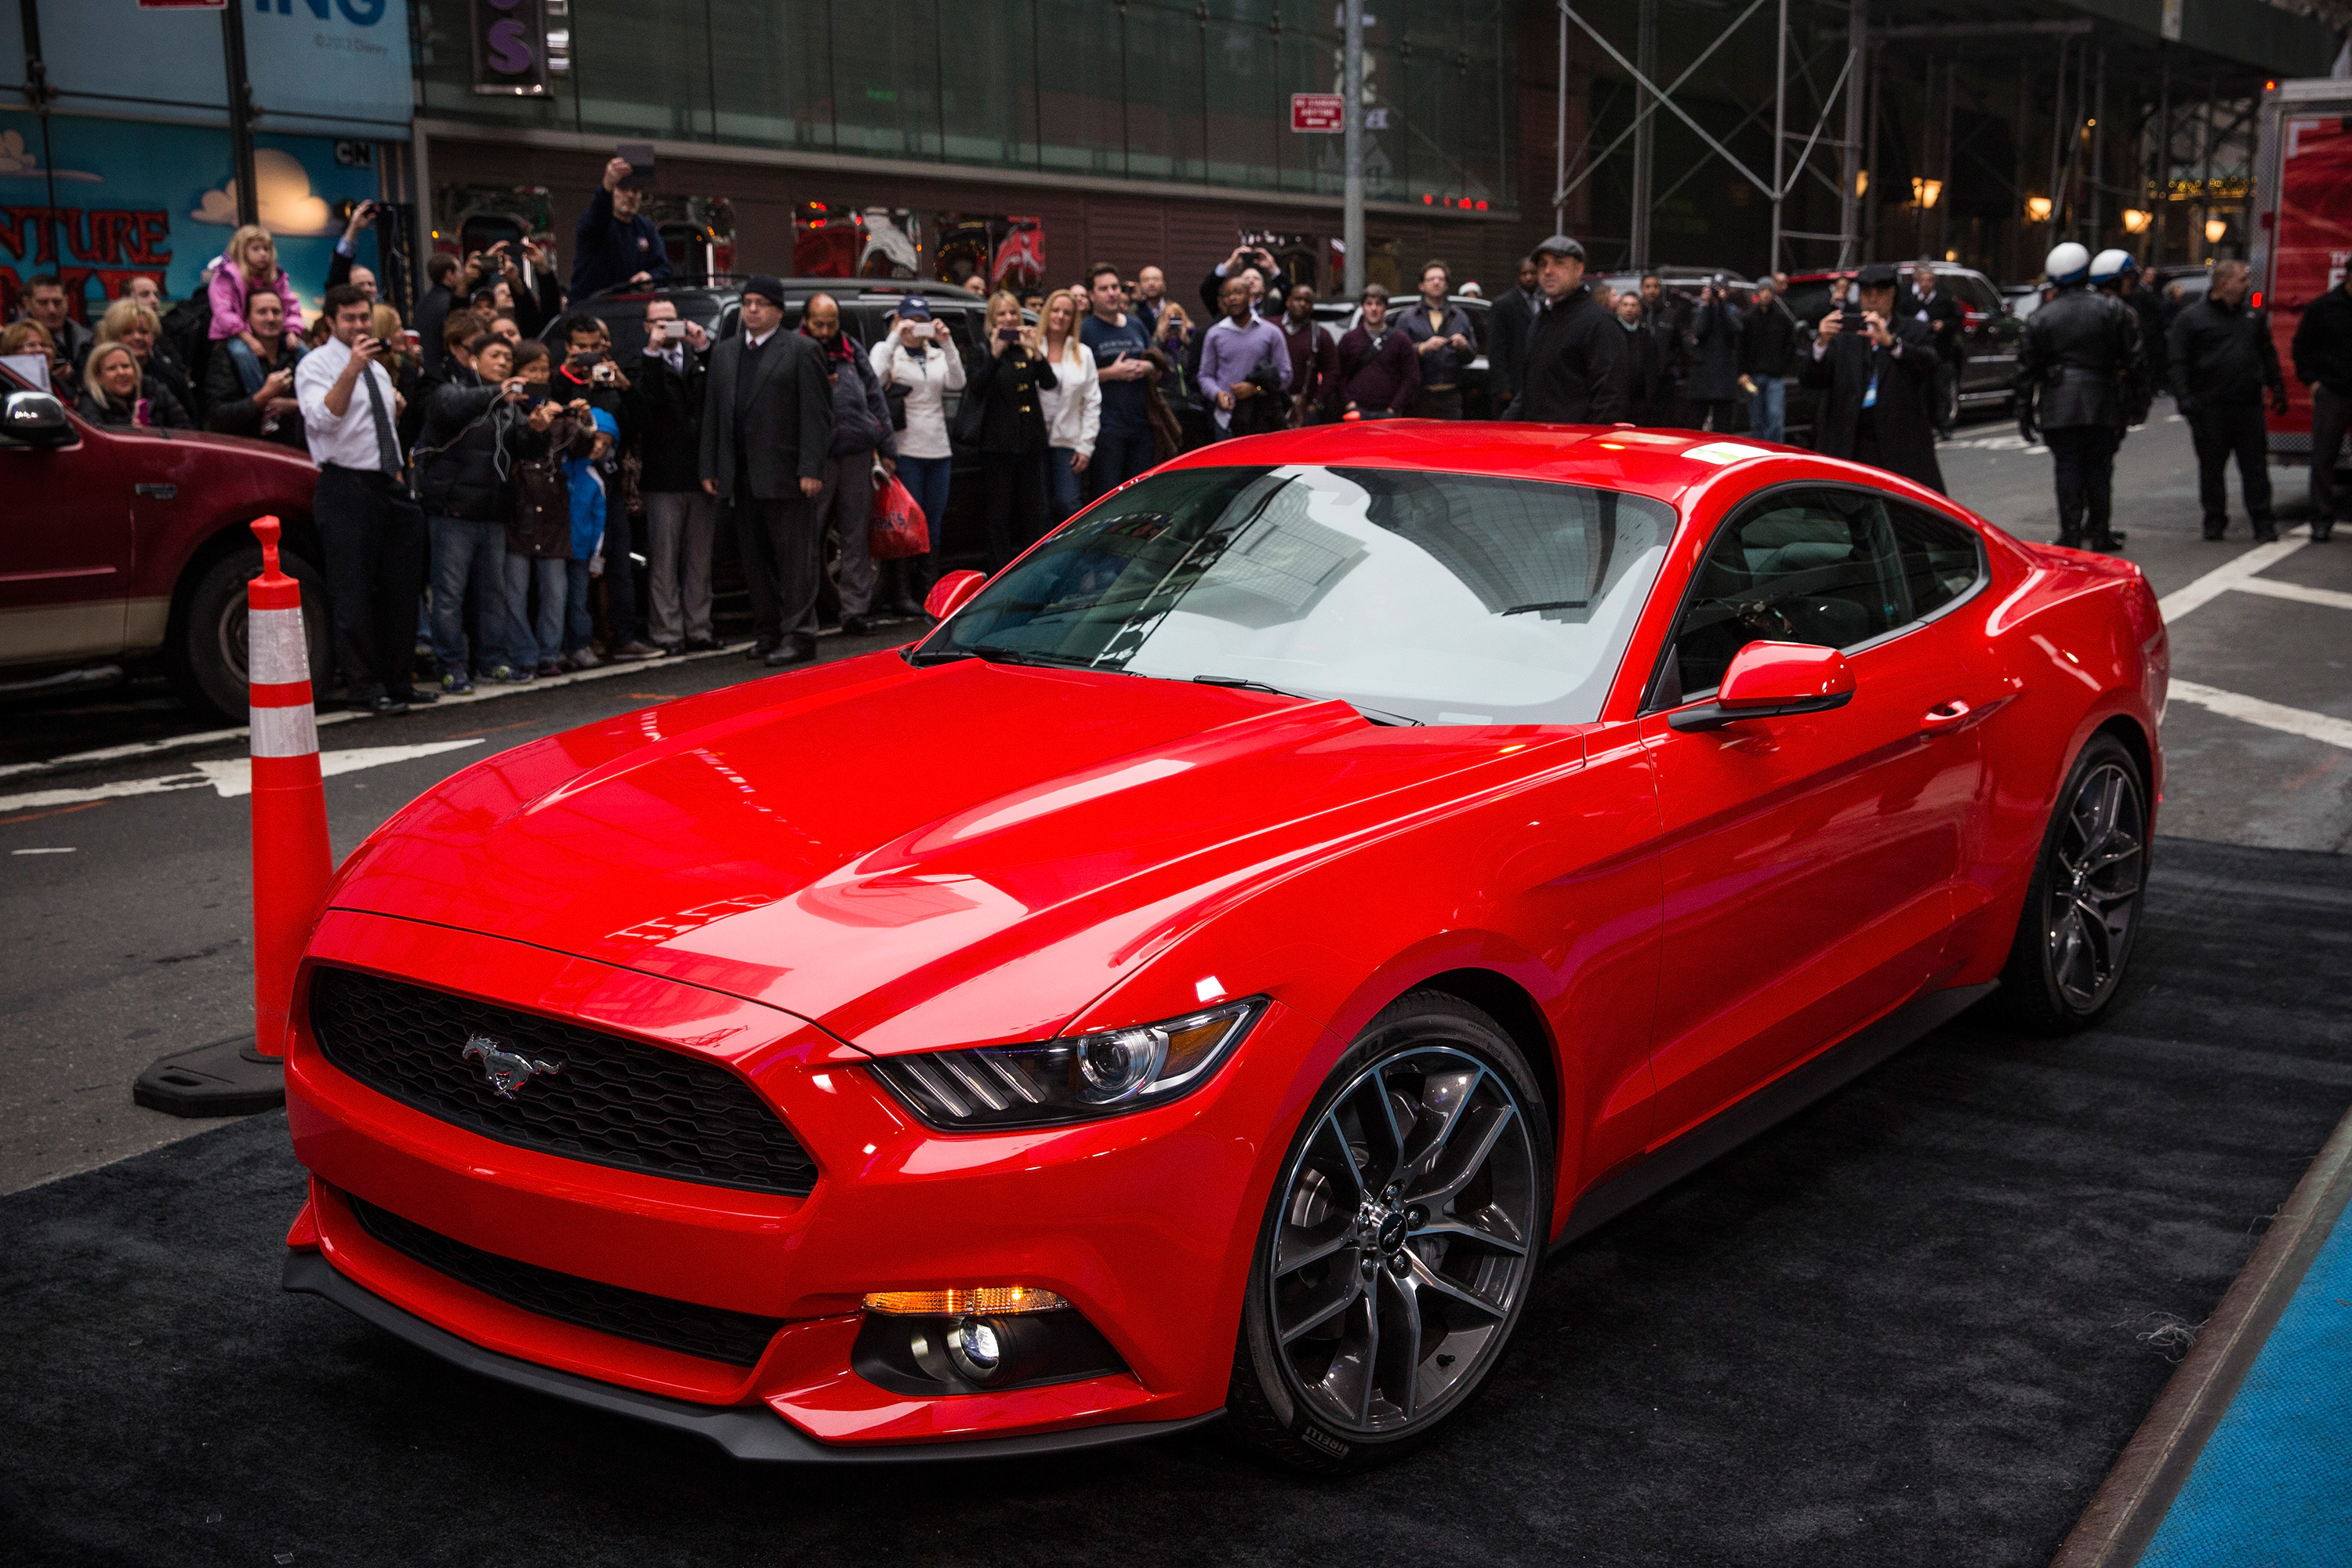 A red Ford Mustang on display